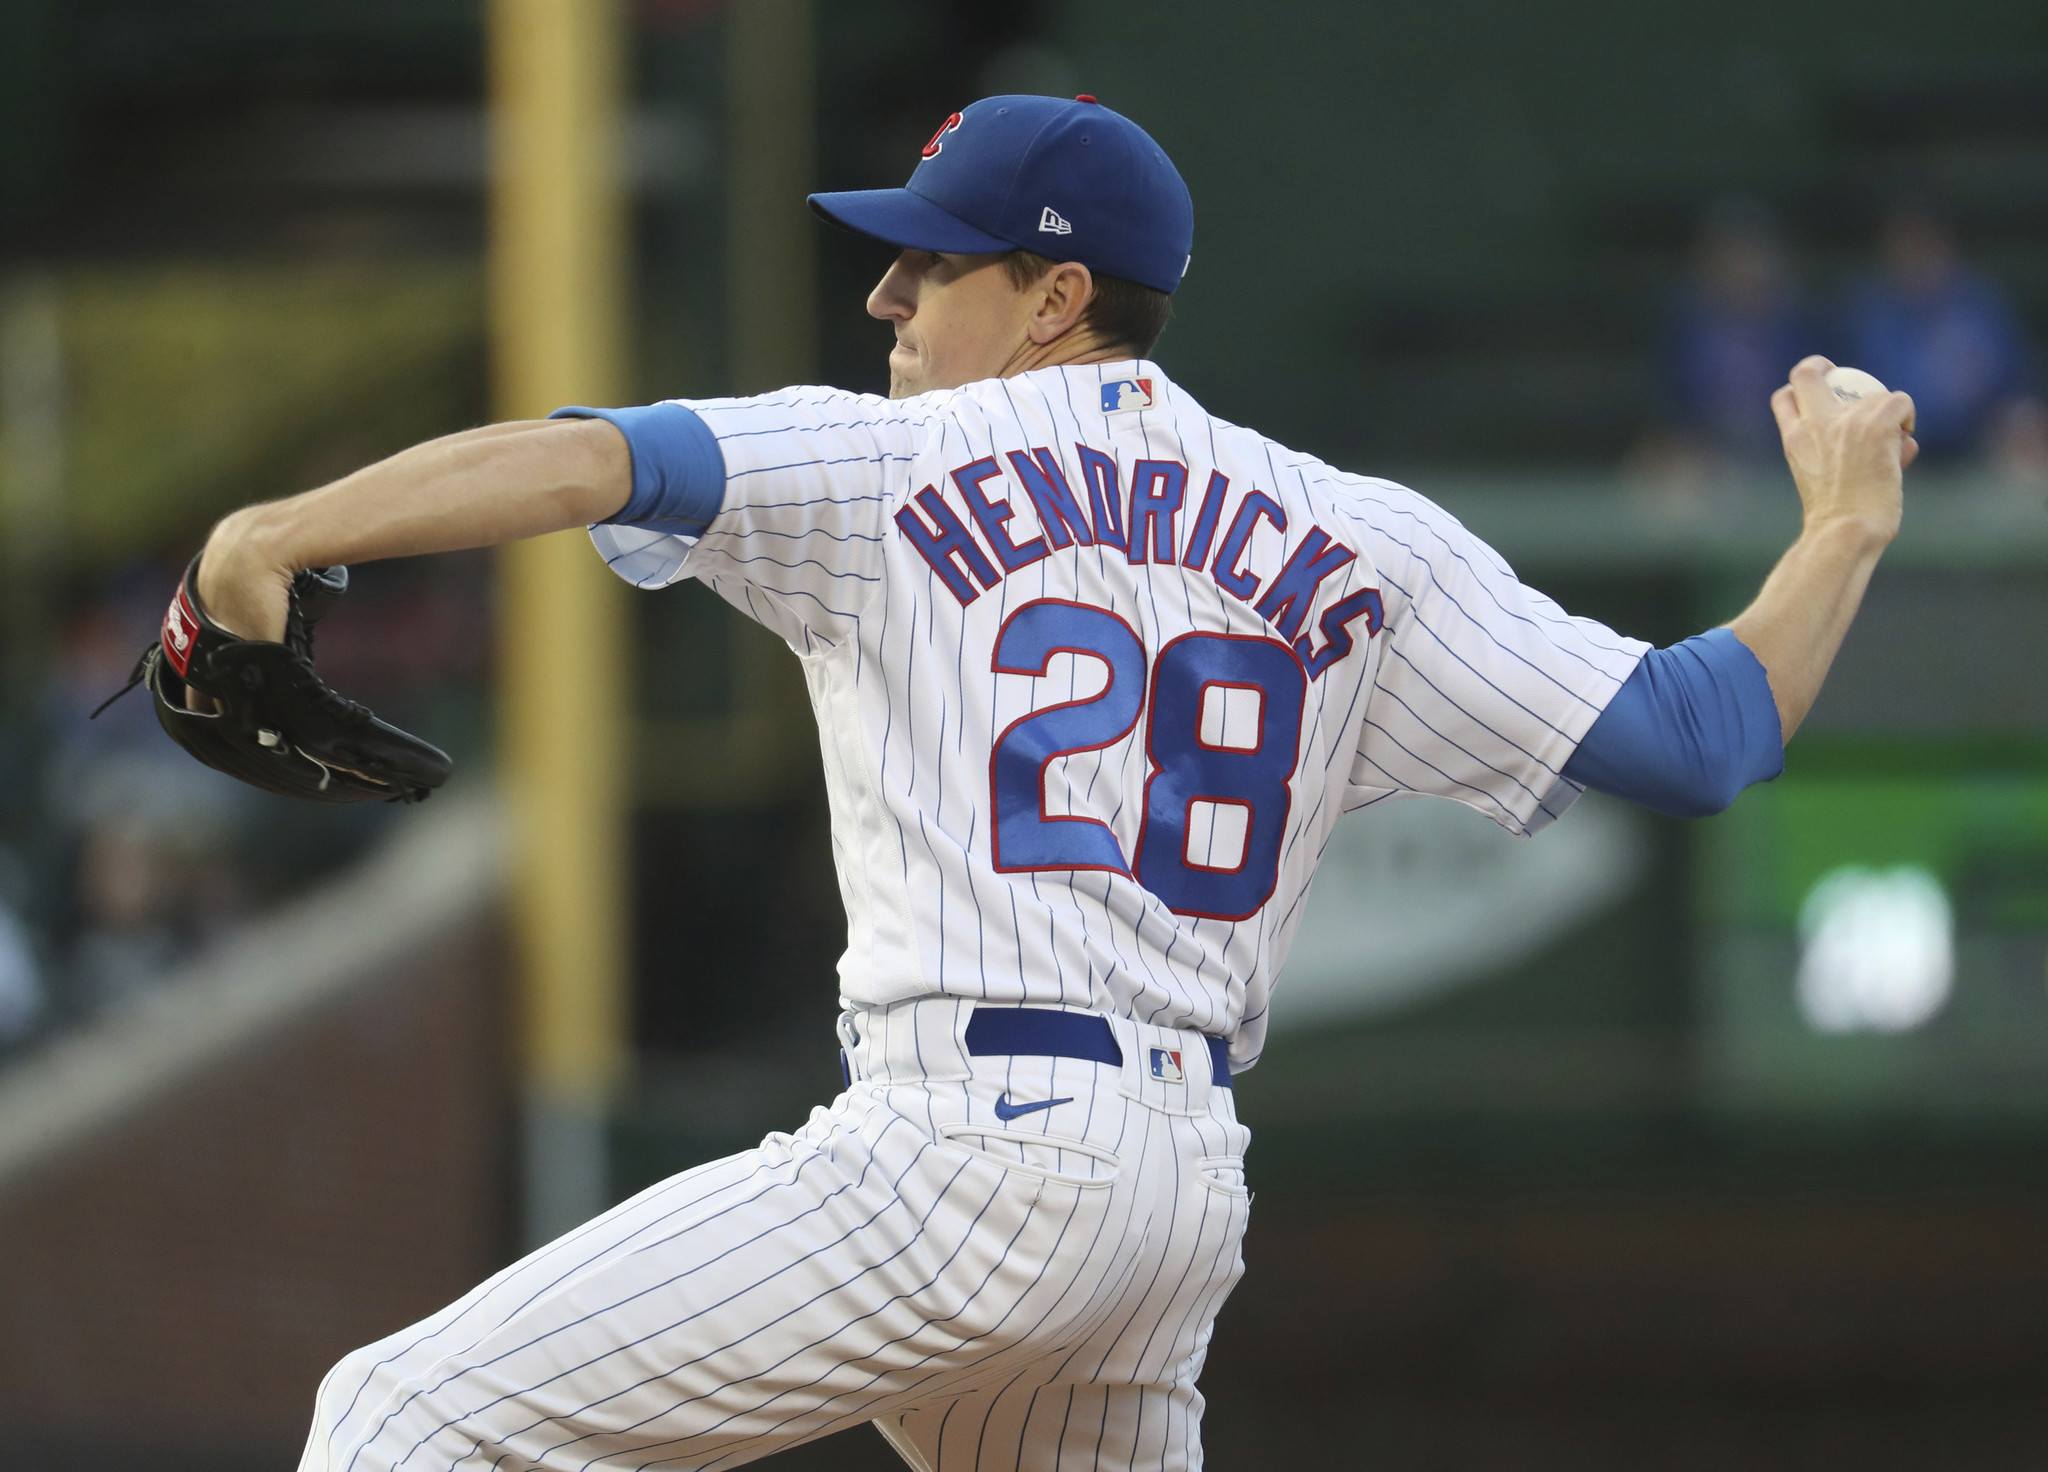 What's going on with Kyle Hendricks? - Bleed Cubbie Blue